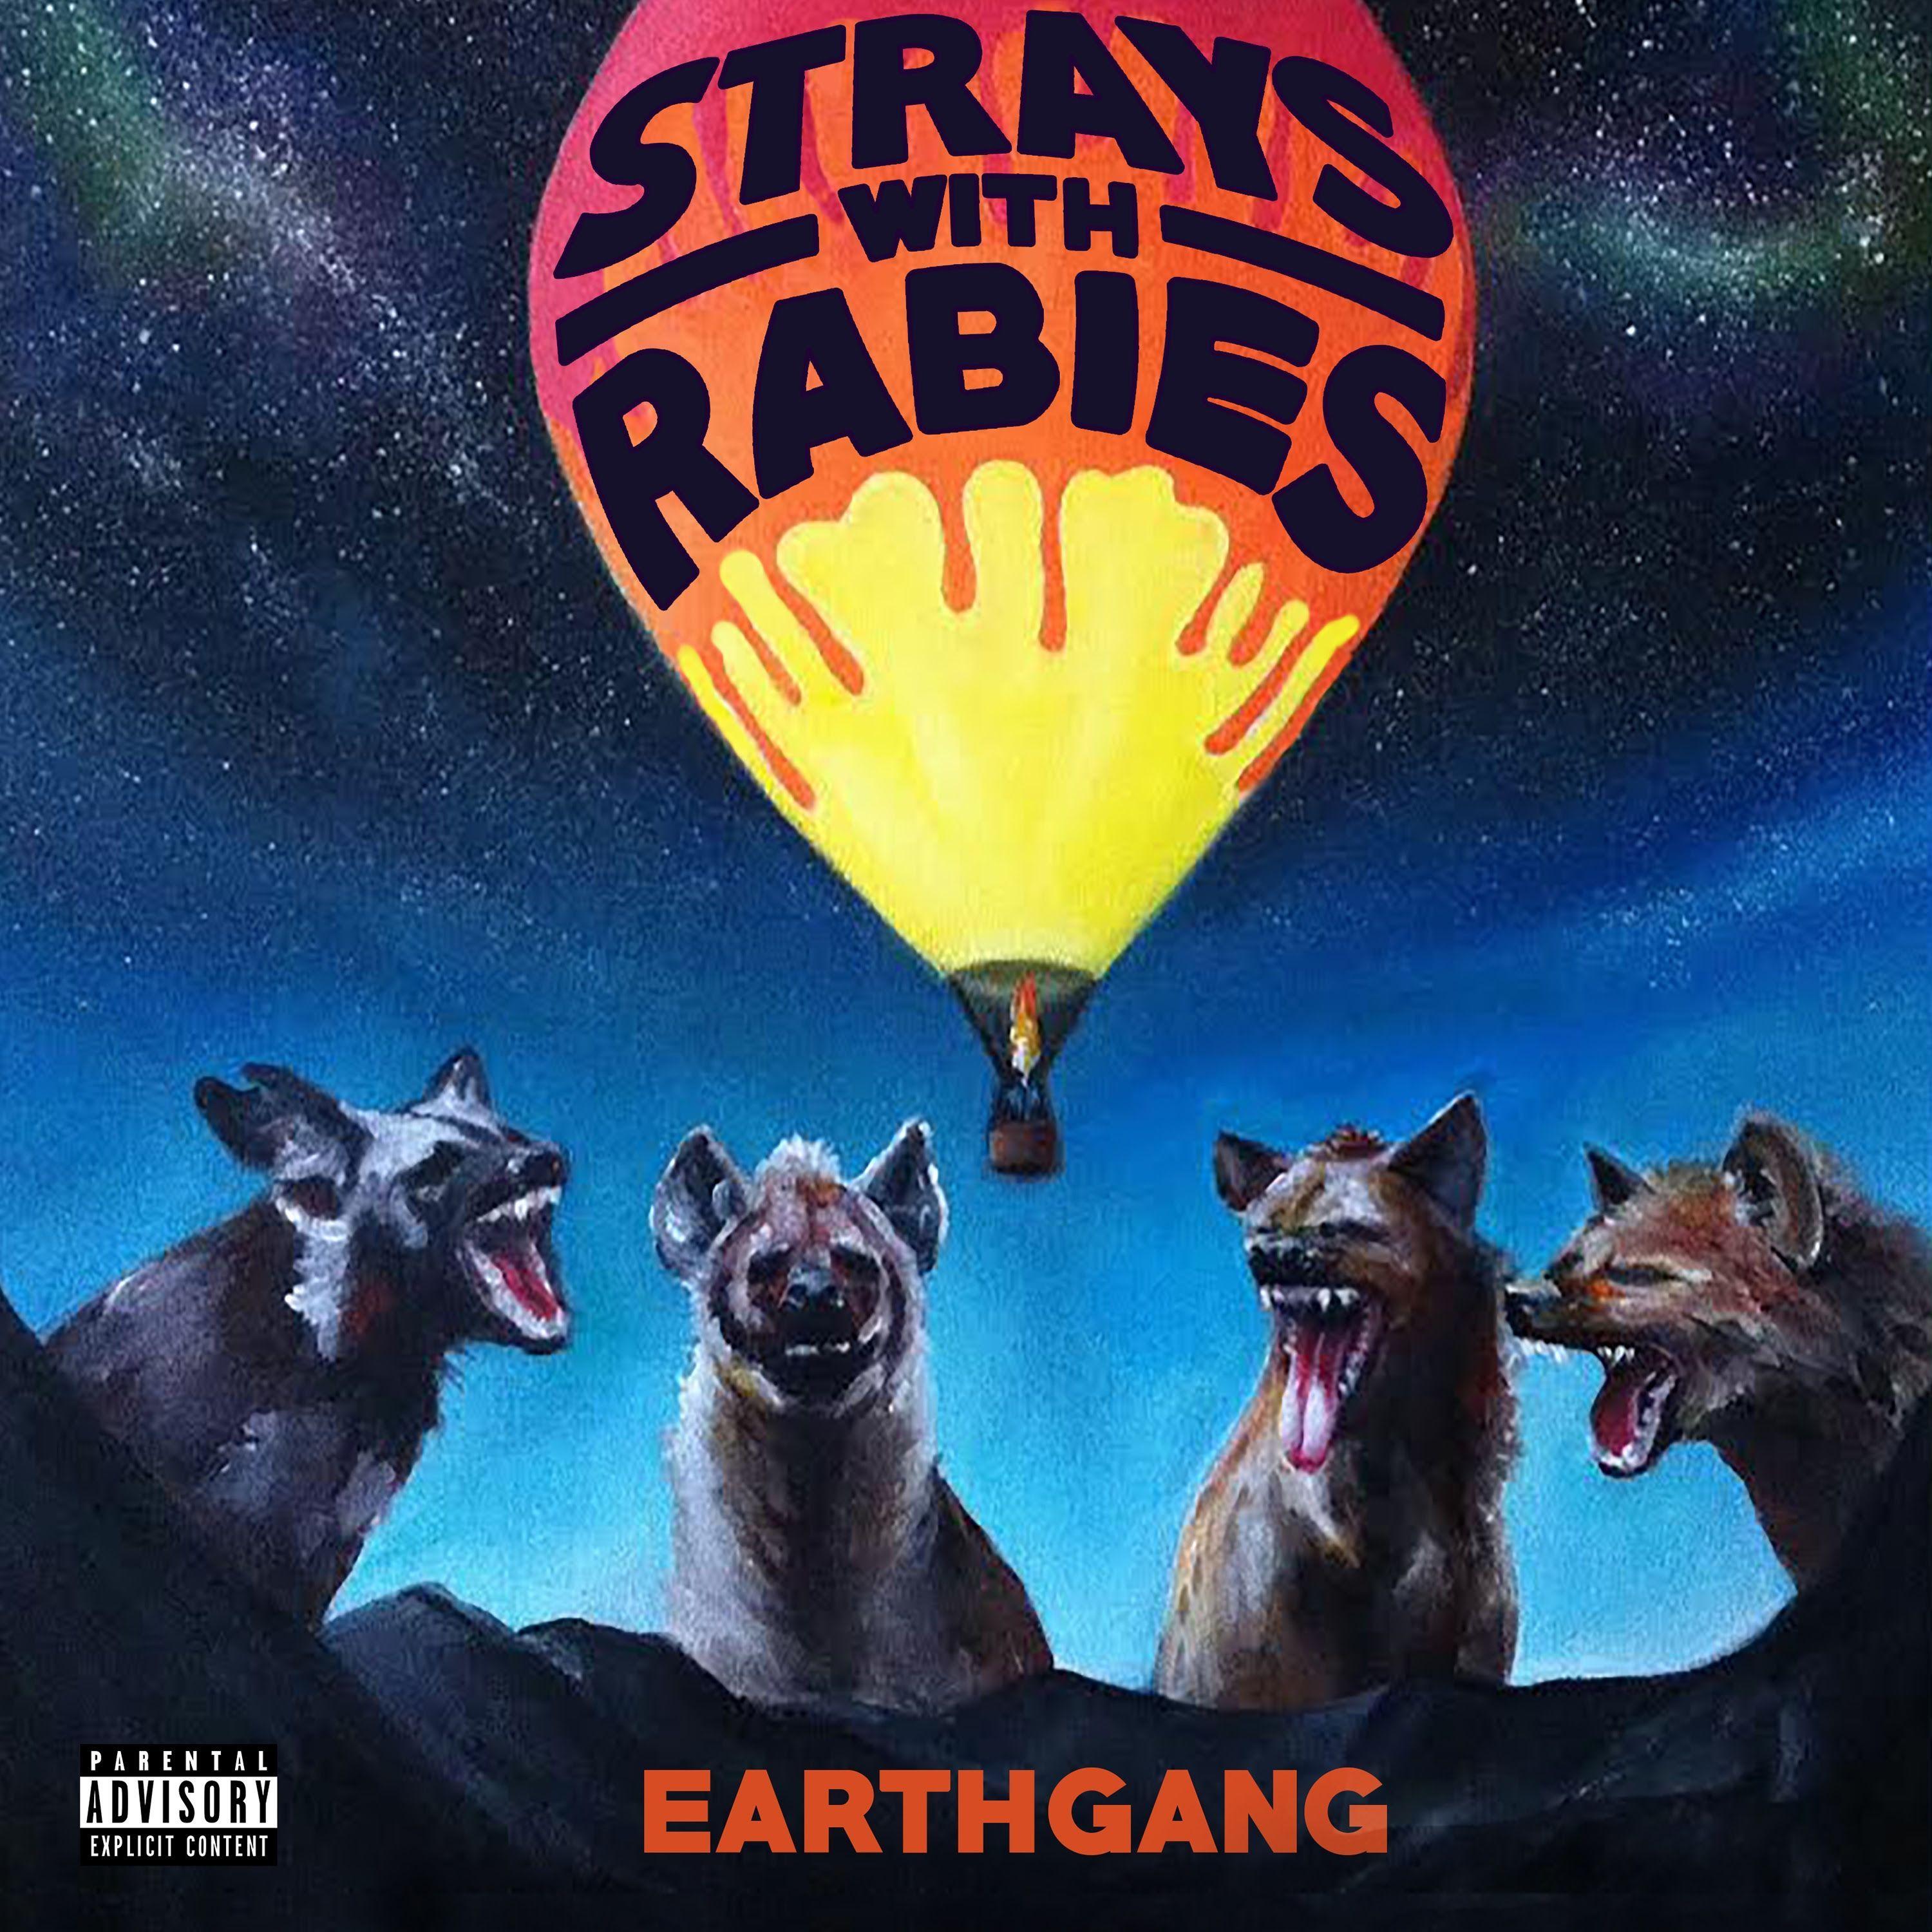 EARTHGANG Drops New Project “Strays With Rabies